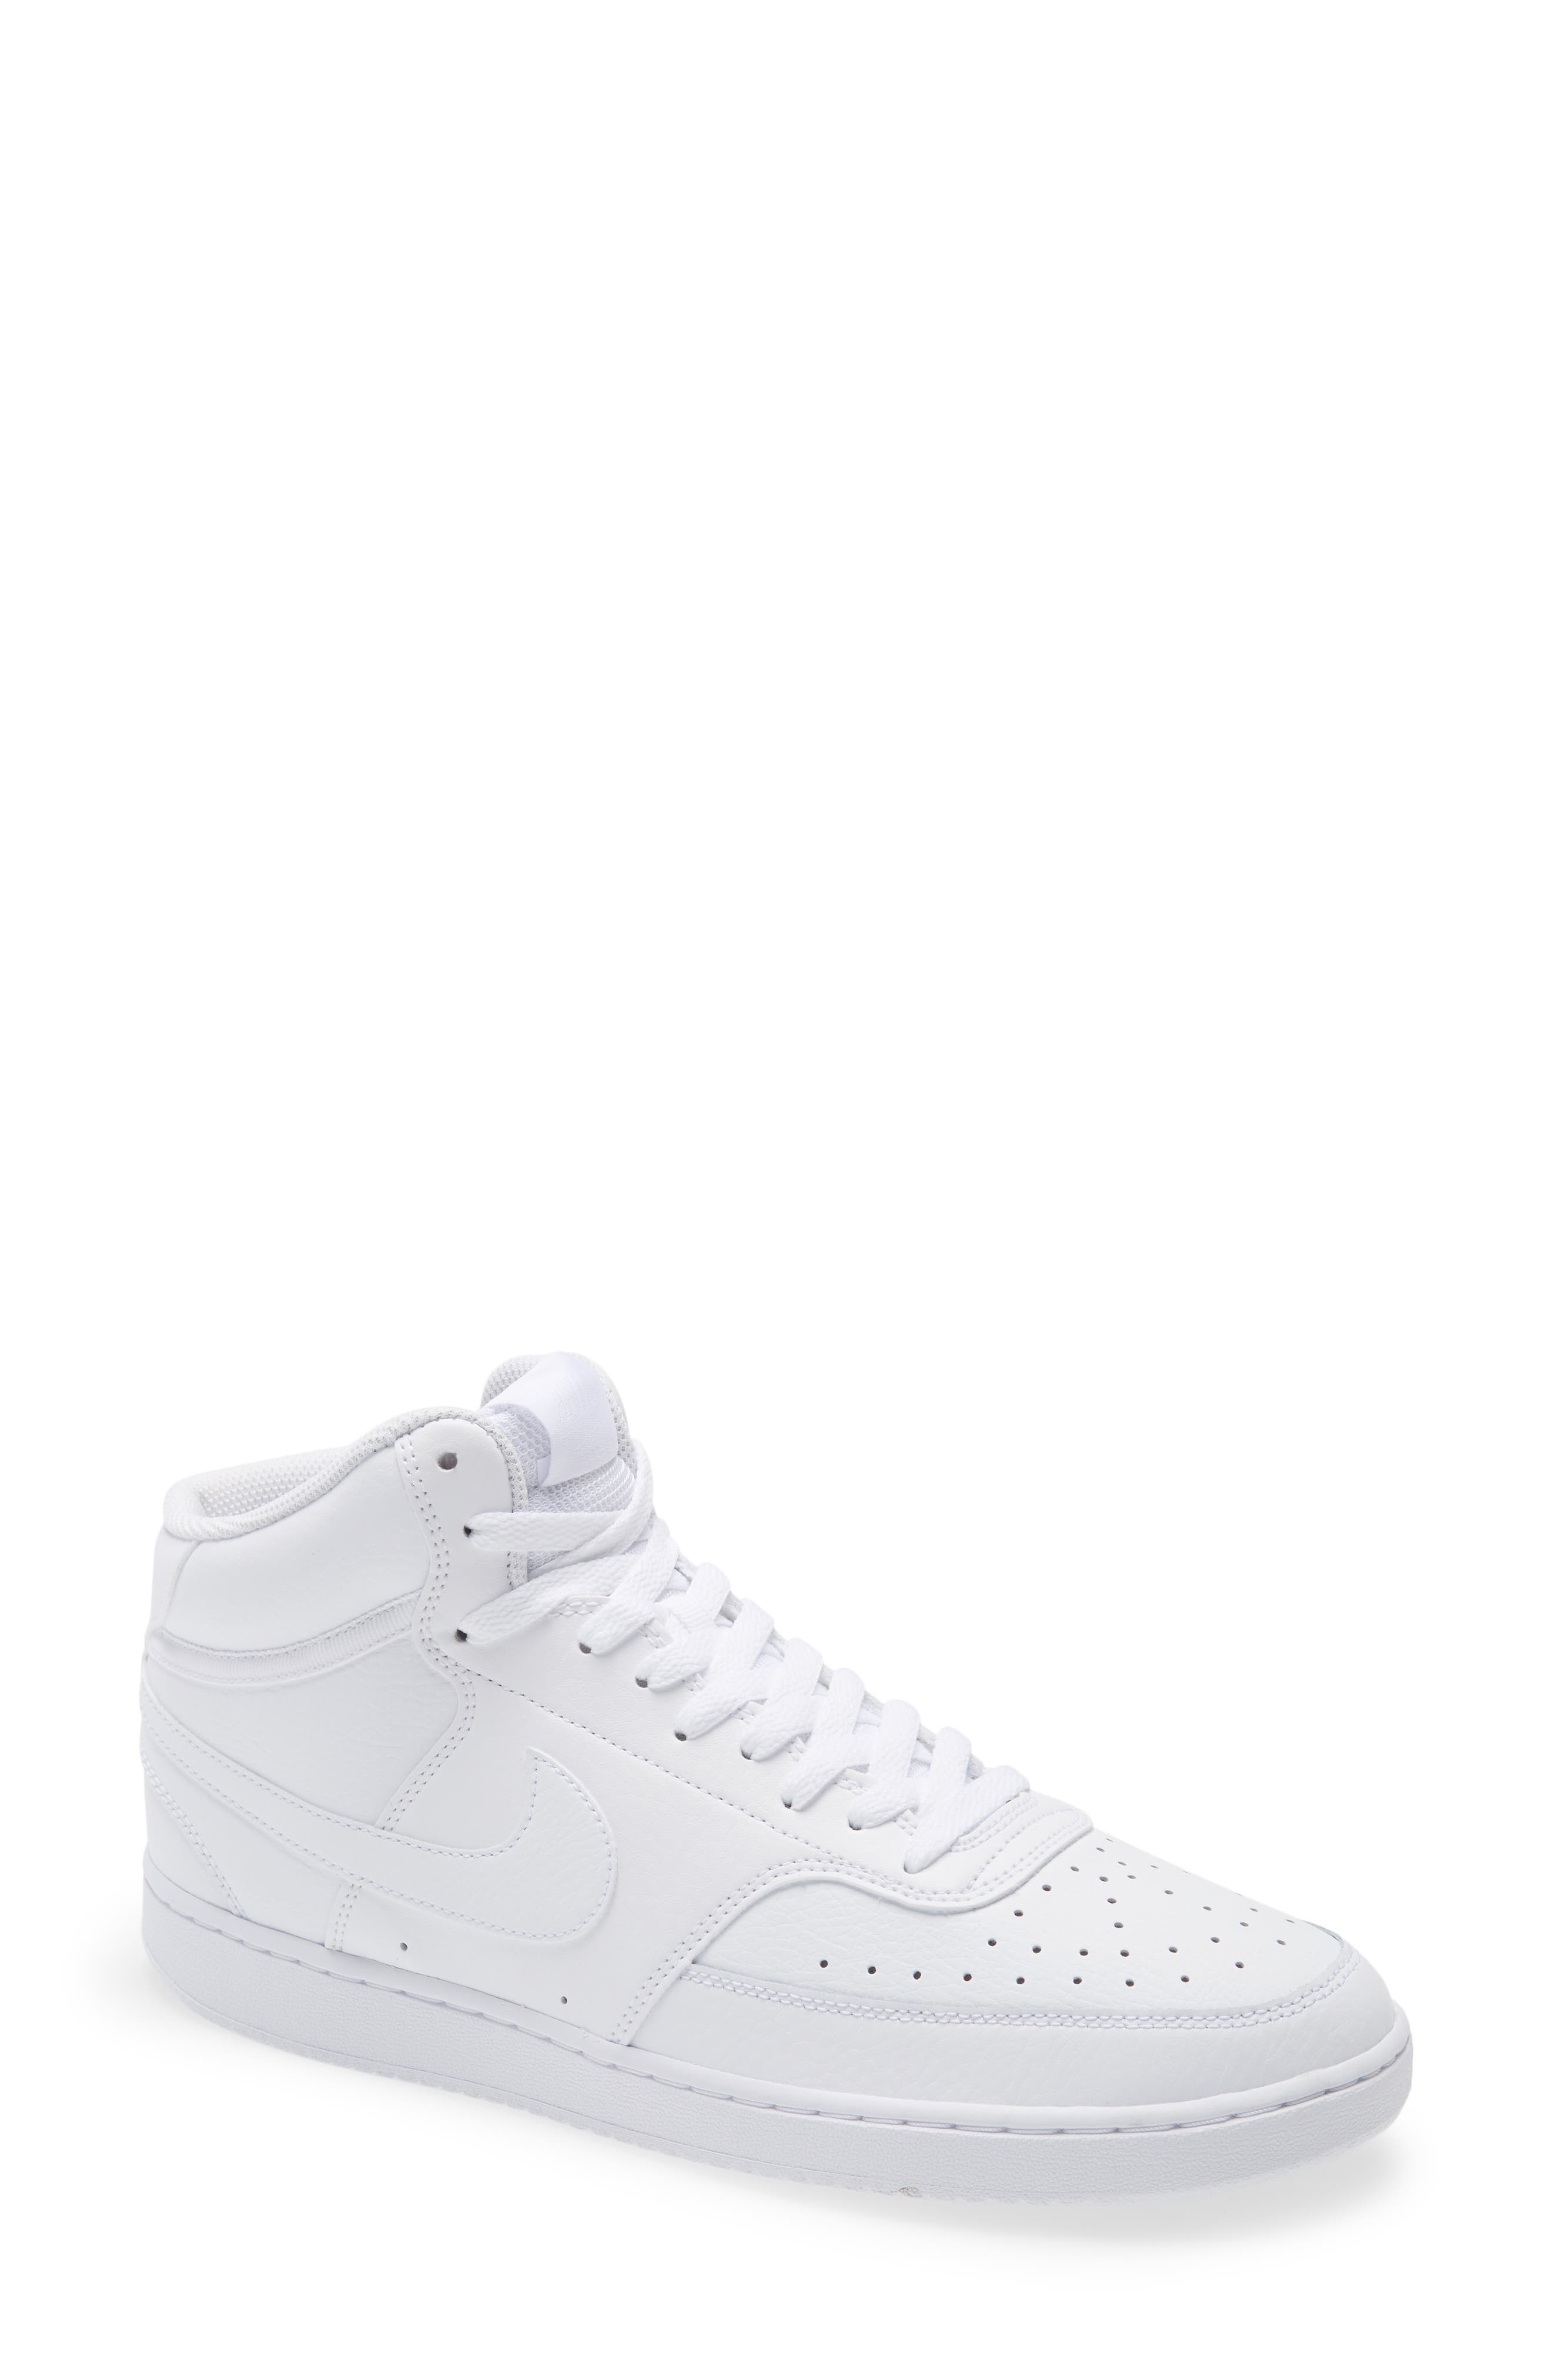 NIKE COURT ROYALE MID SNEAKER,193153970501